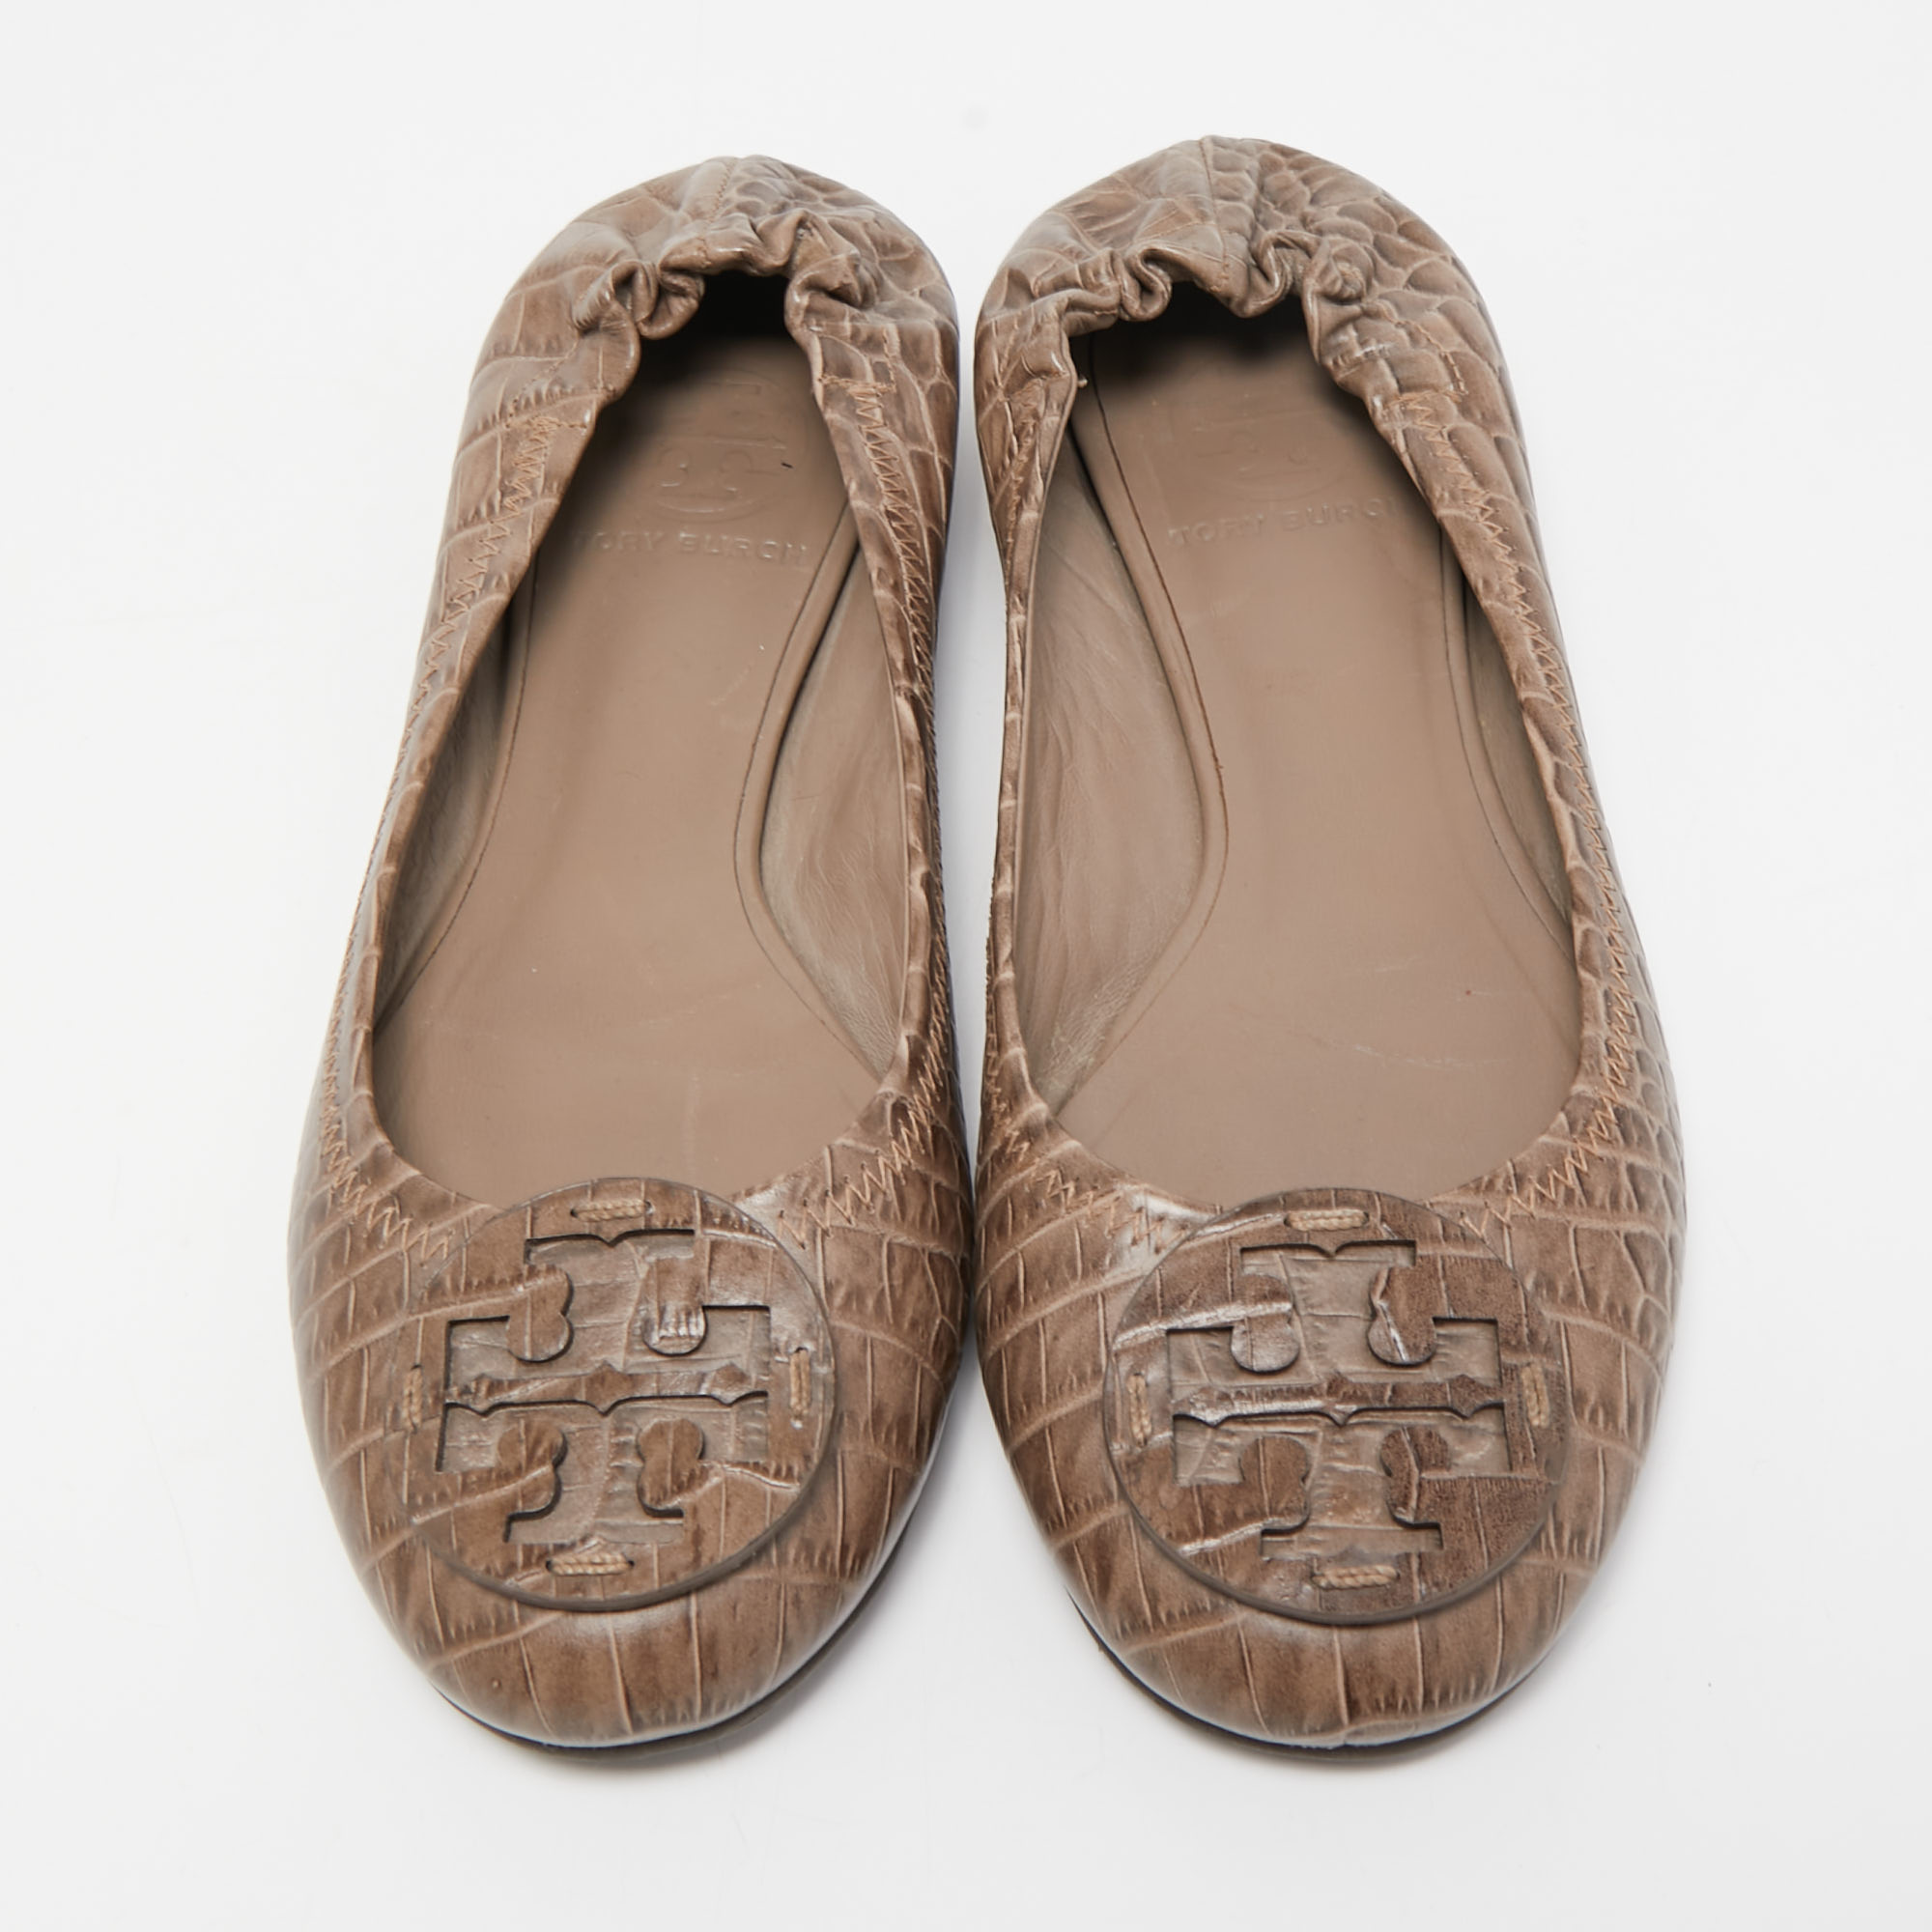 Tory Burch Brown Croc Embossed Leather Reva Ballet Flats Size 37